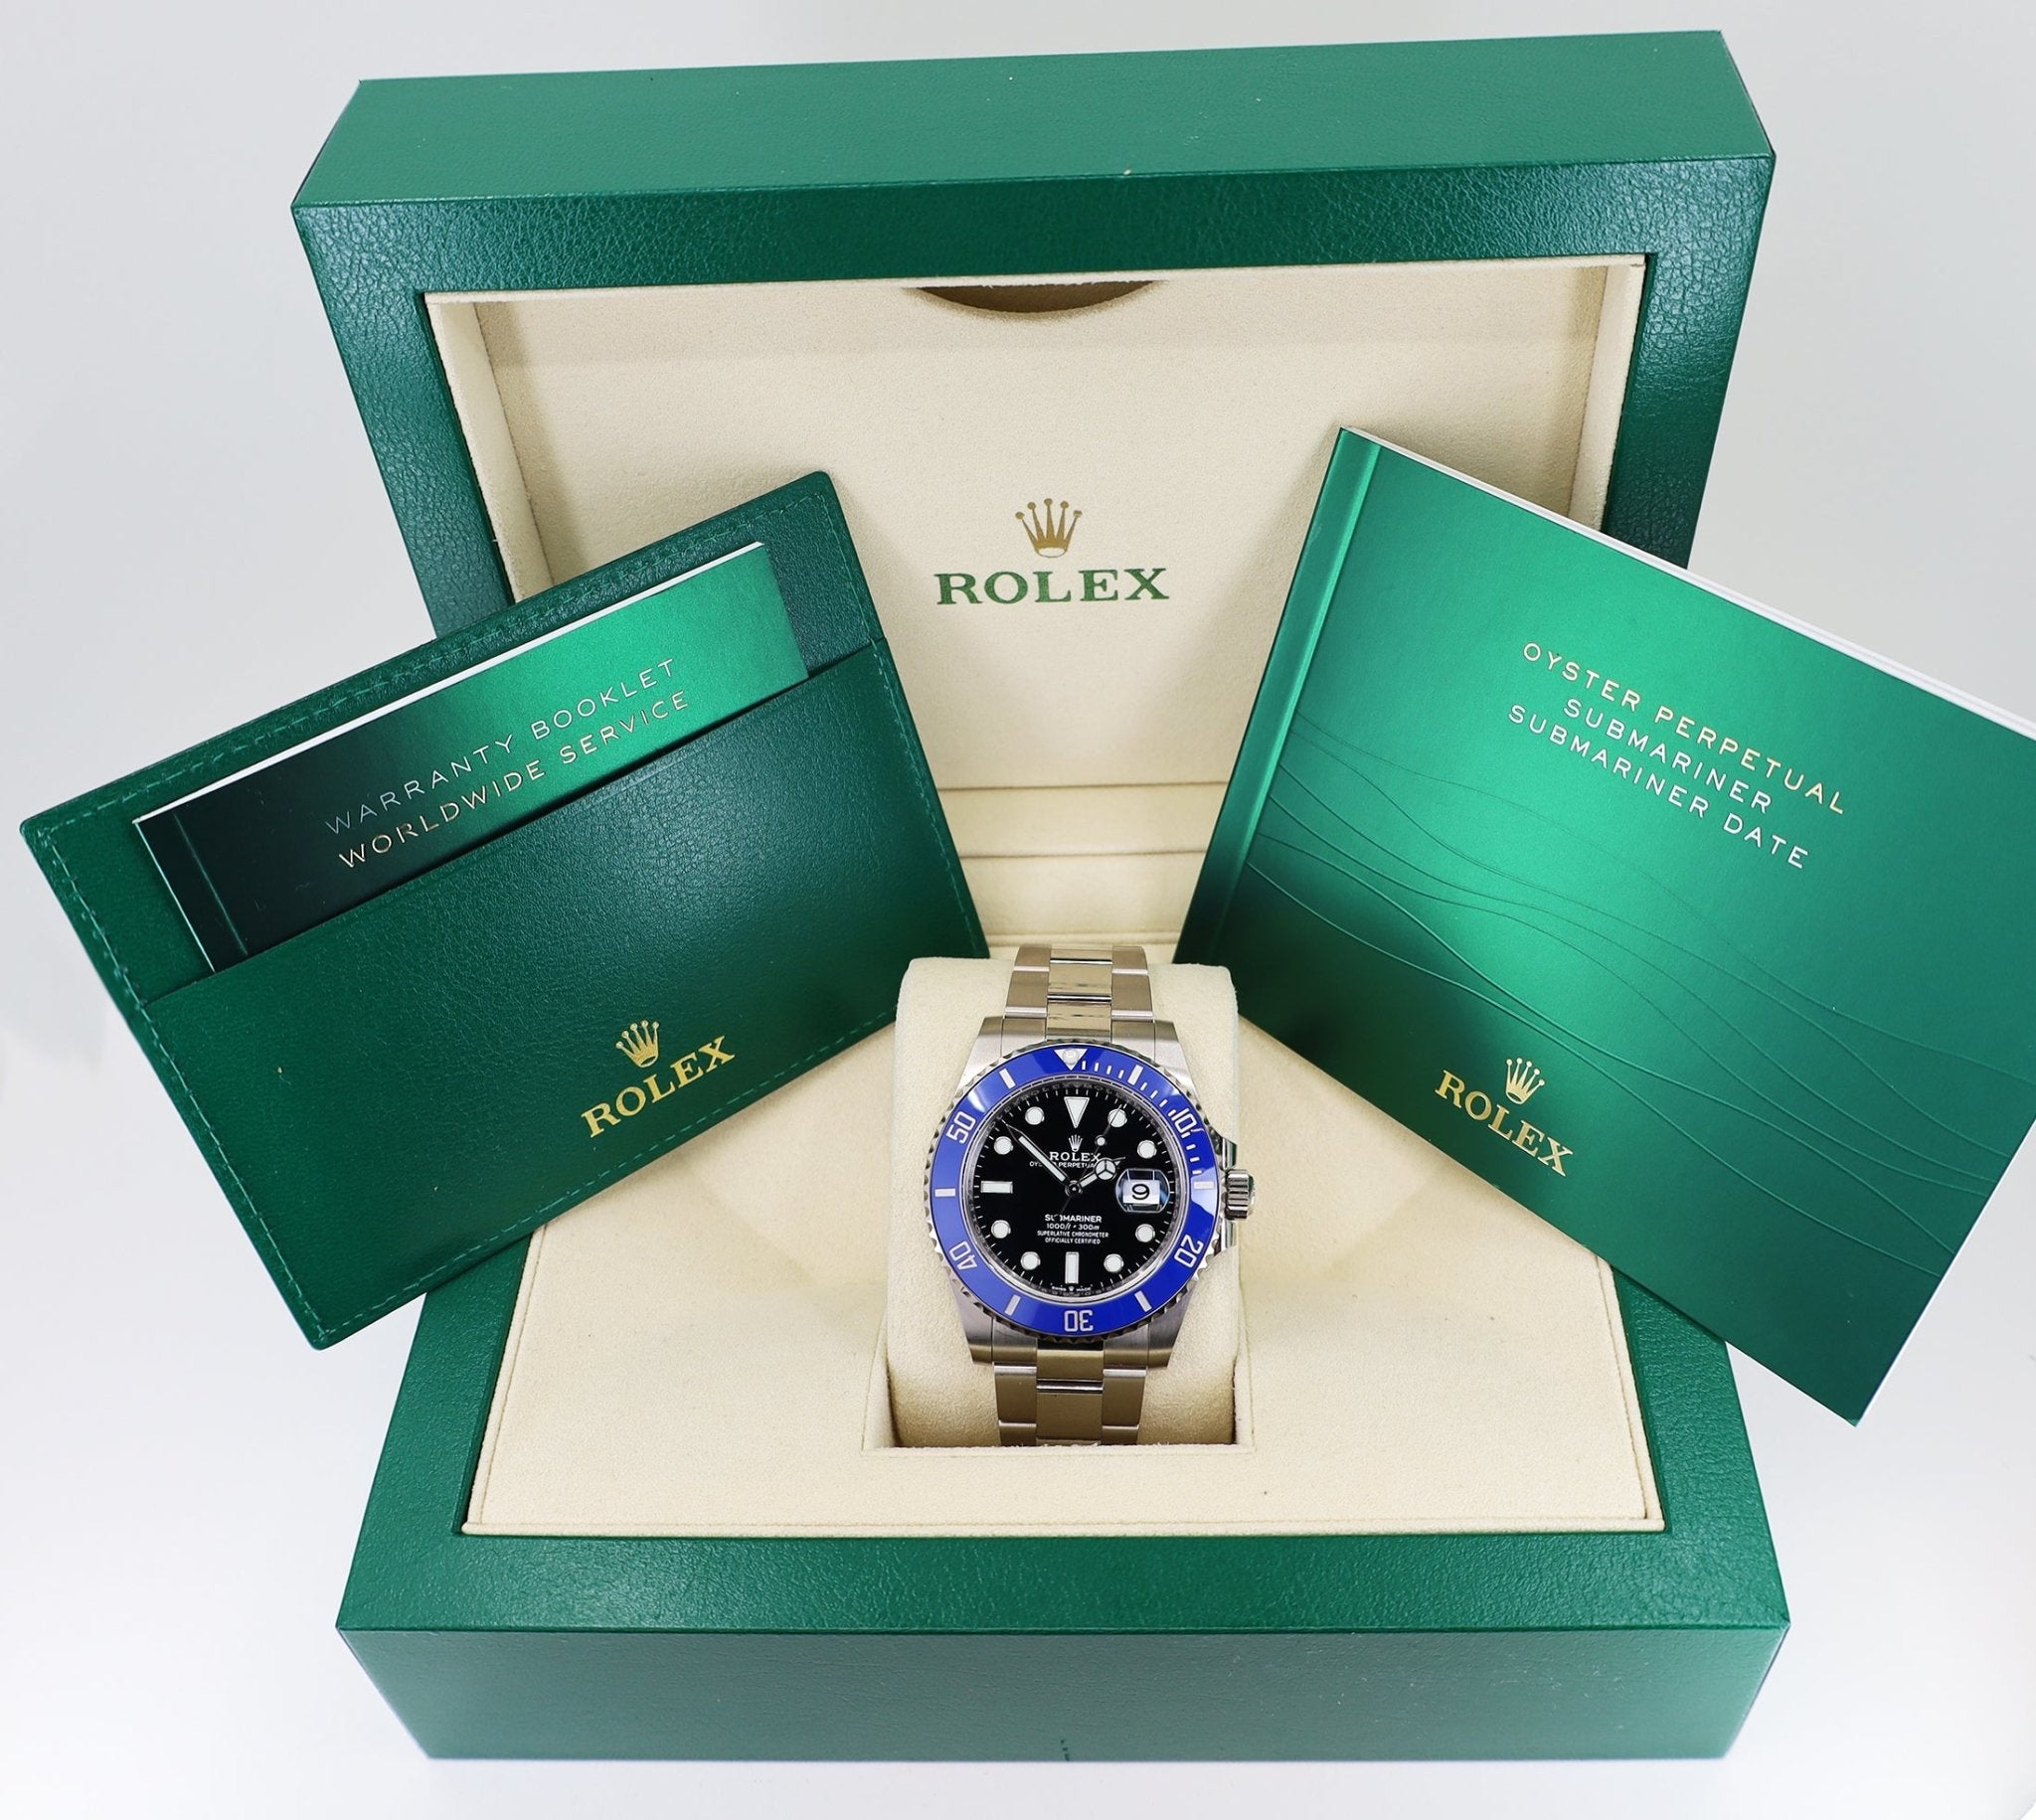 Rare Oyster: Testing the Rolex Oyster Perpetual Submariner Date LV